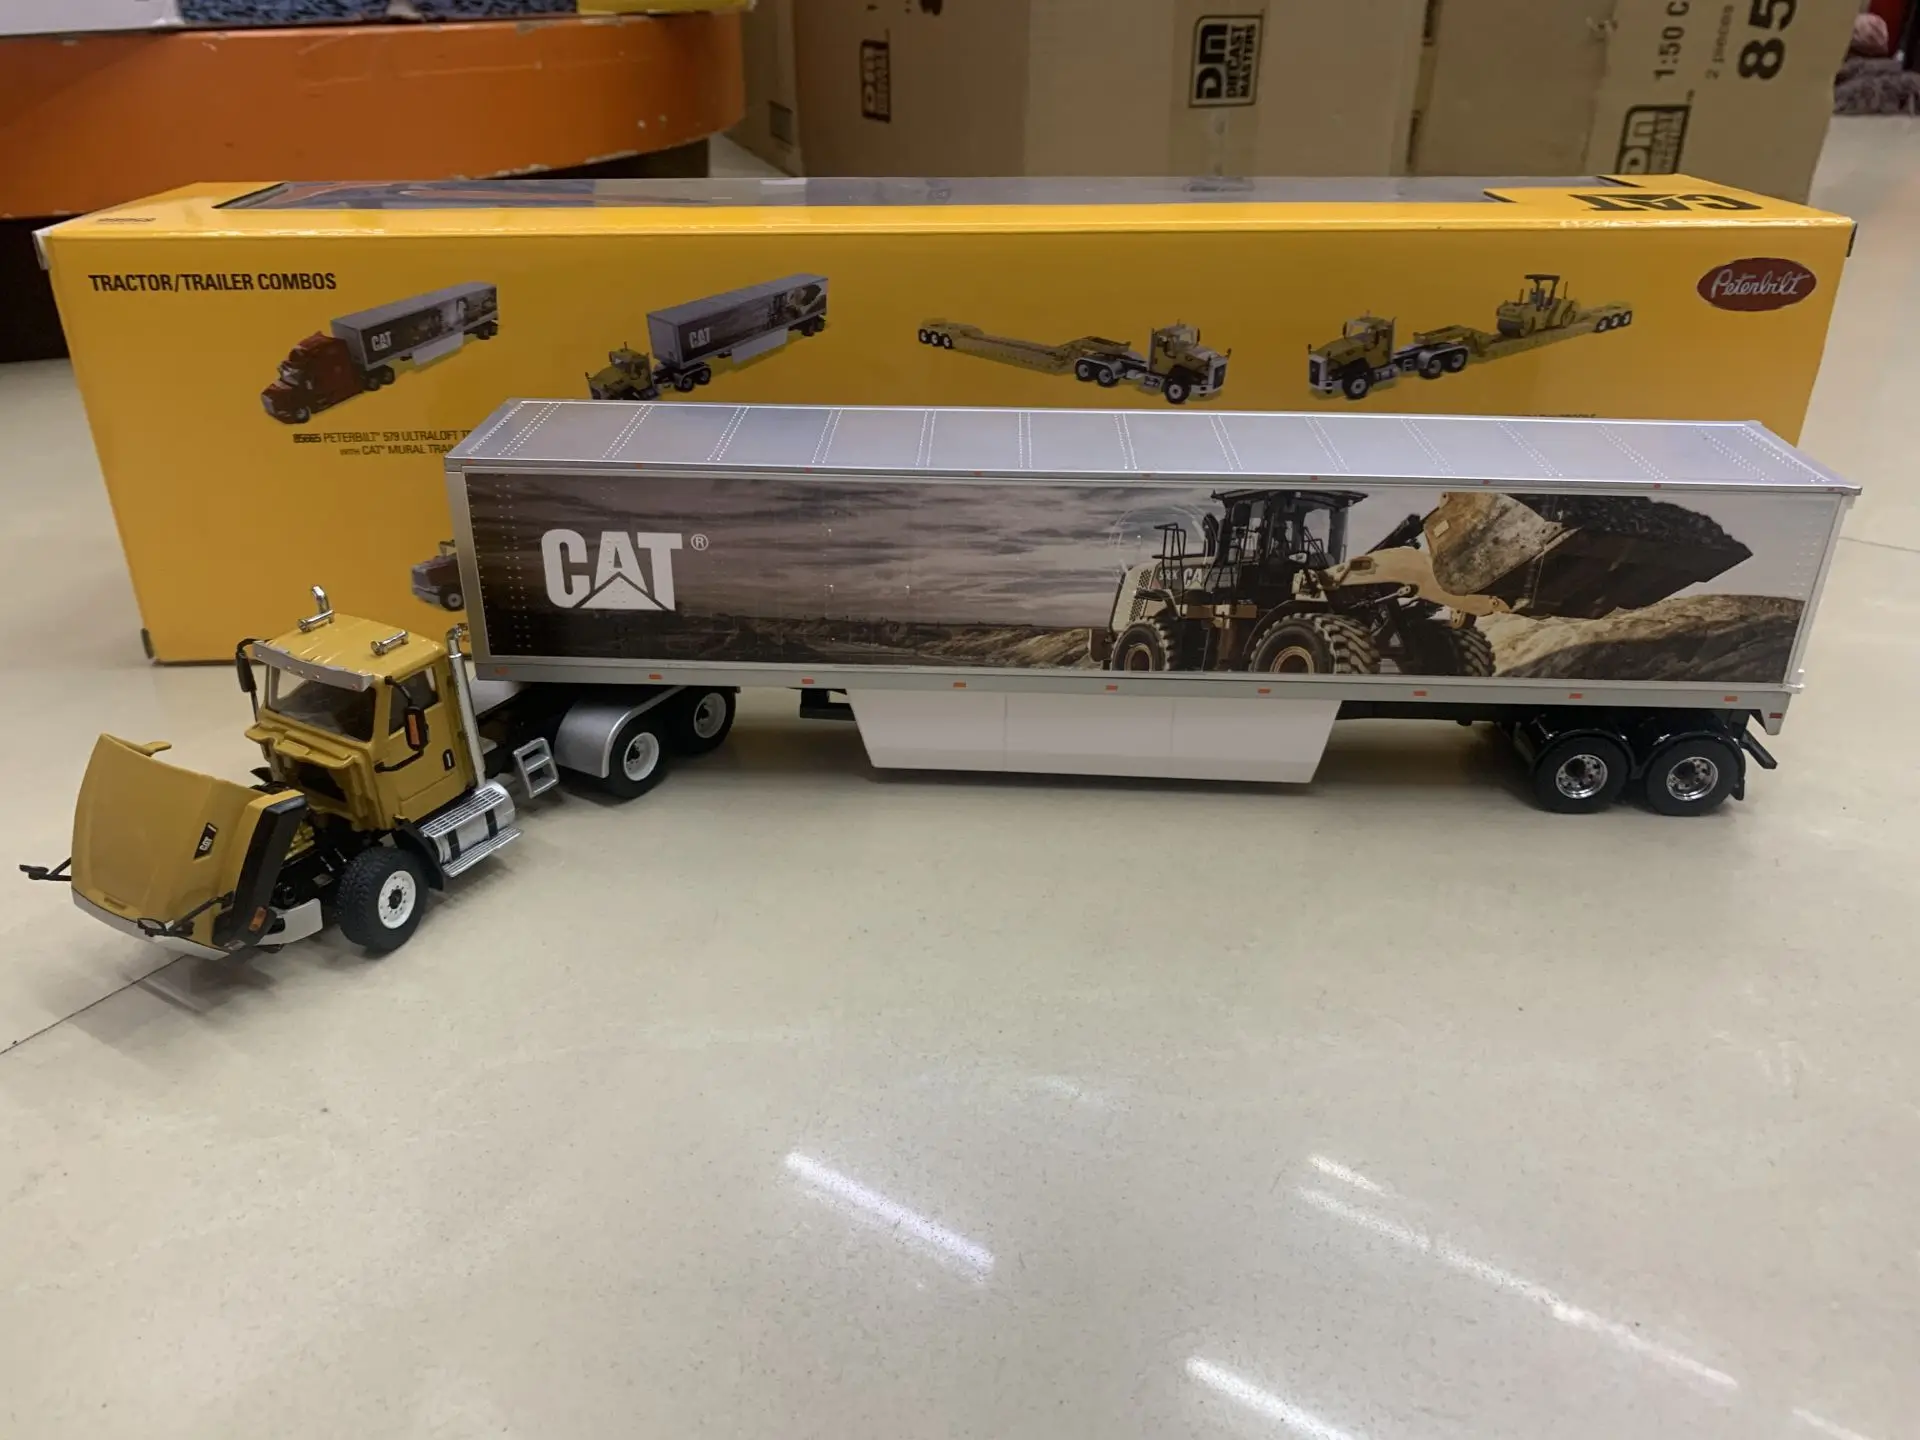 

CAT CT660 Day Cab Tractor With Mural Trailer 1:50 Scale Metal Model By DieCast Masters DM85666 New in Box